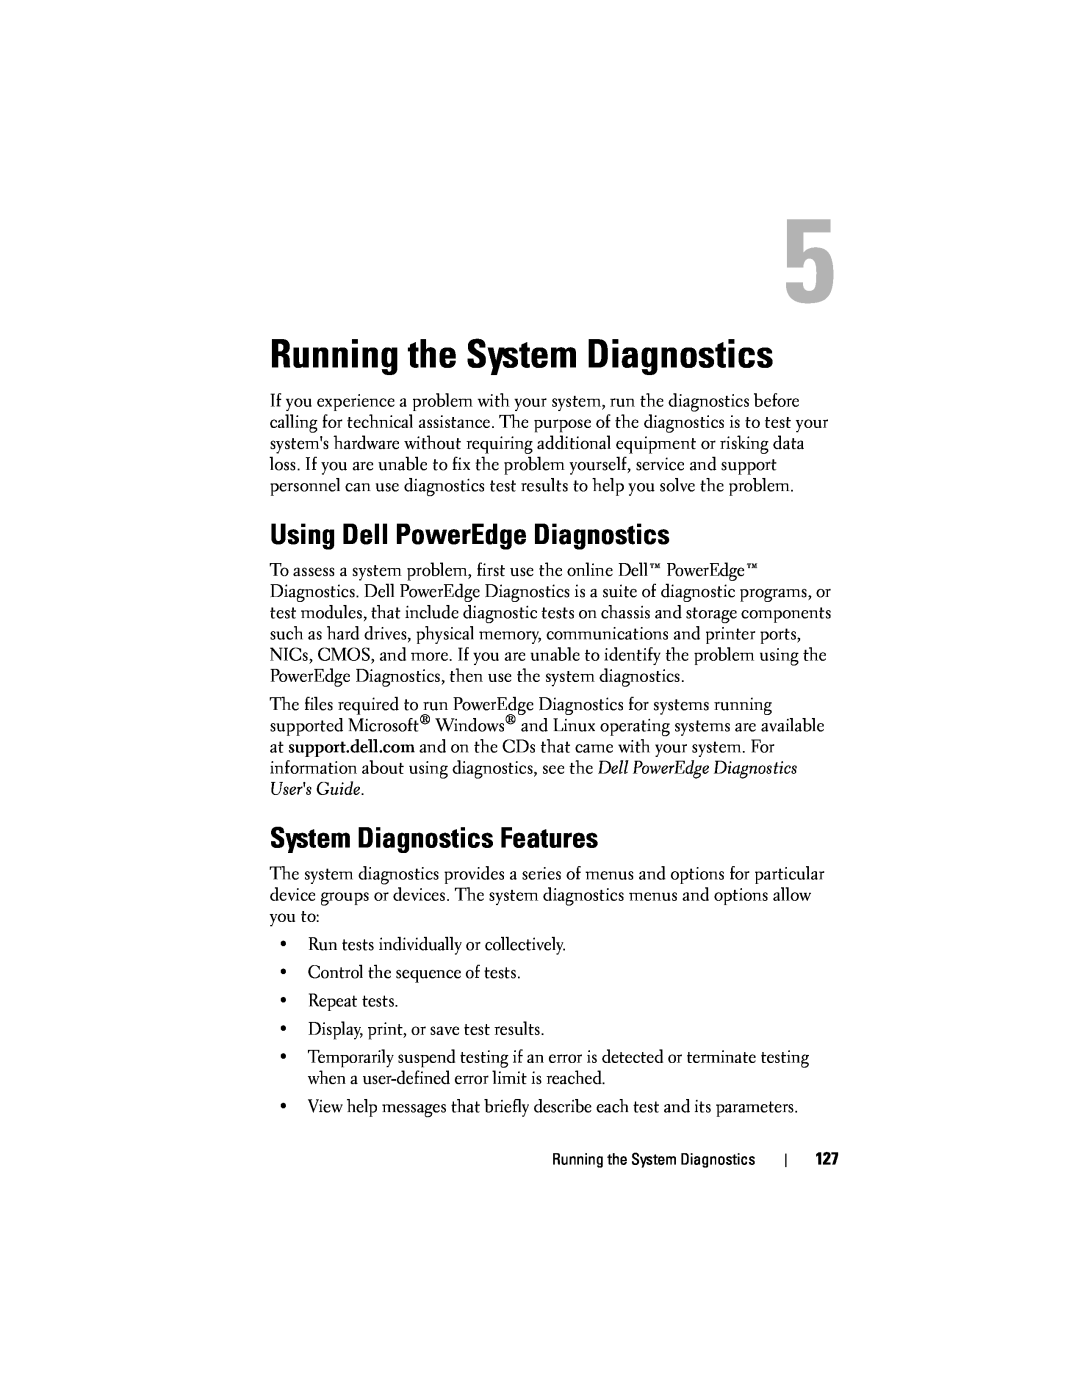 Dell T105 owner manual Running the System Diagnostics, Using Dell PowerEdge Diagnostics, System Diagnostics Features 